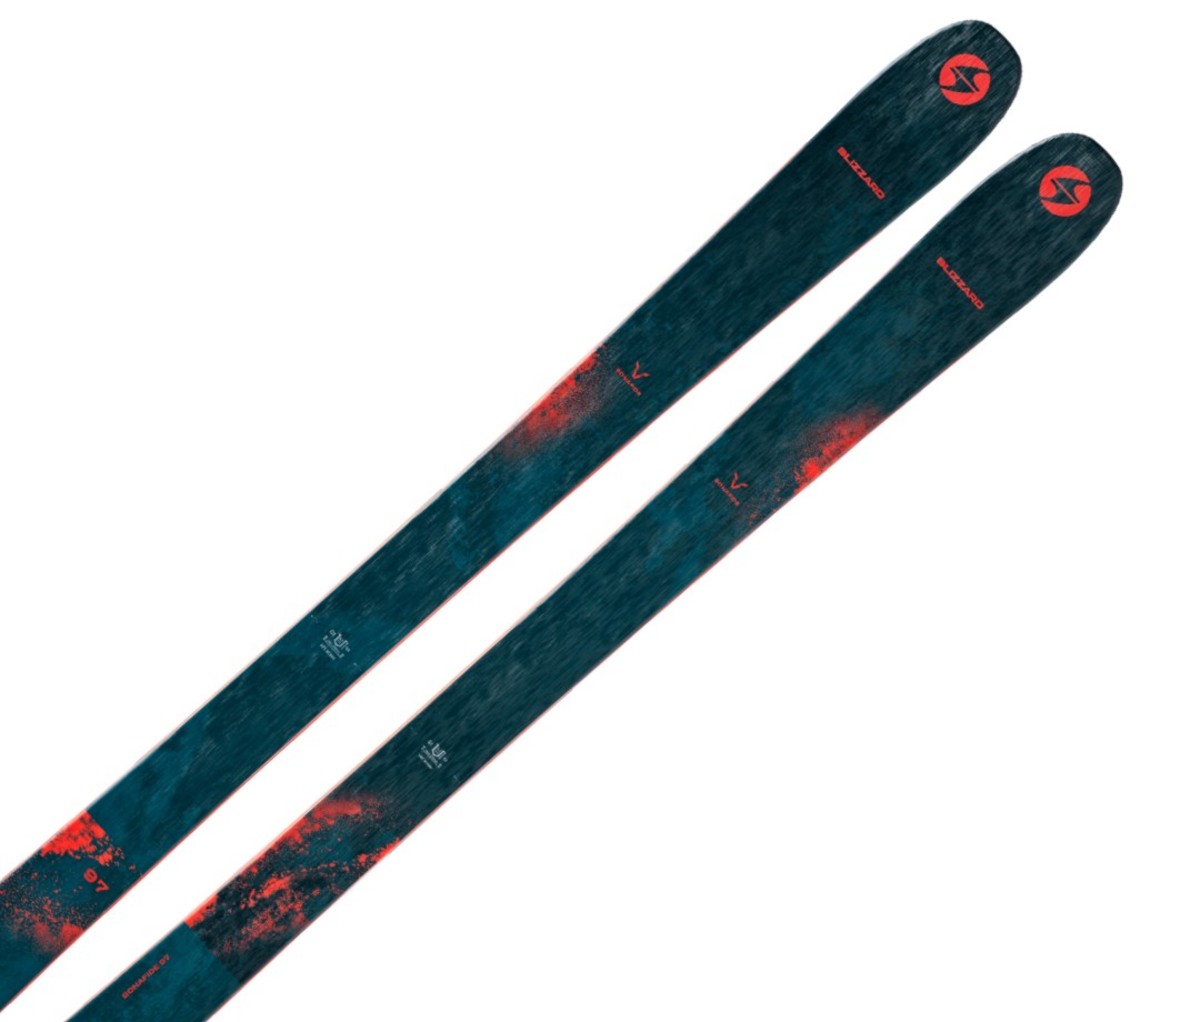 Blue and red patterned skis on white backdrop